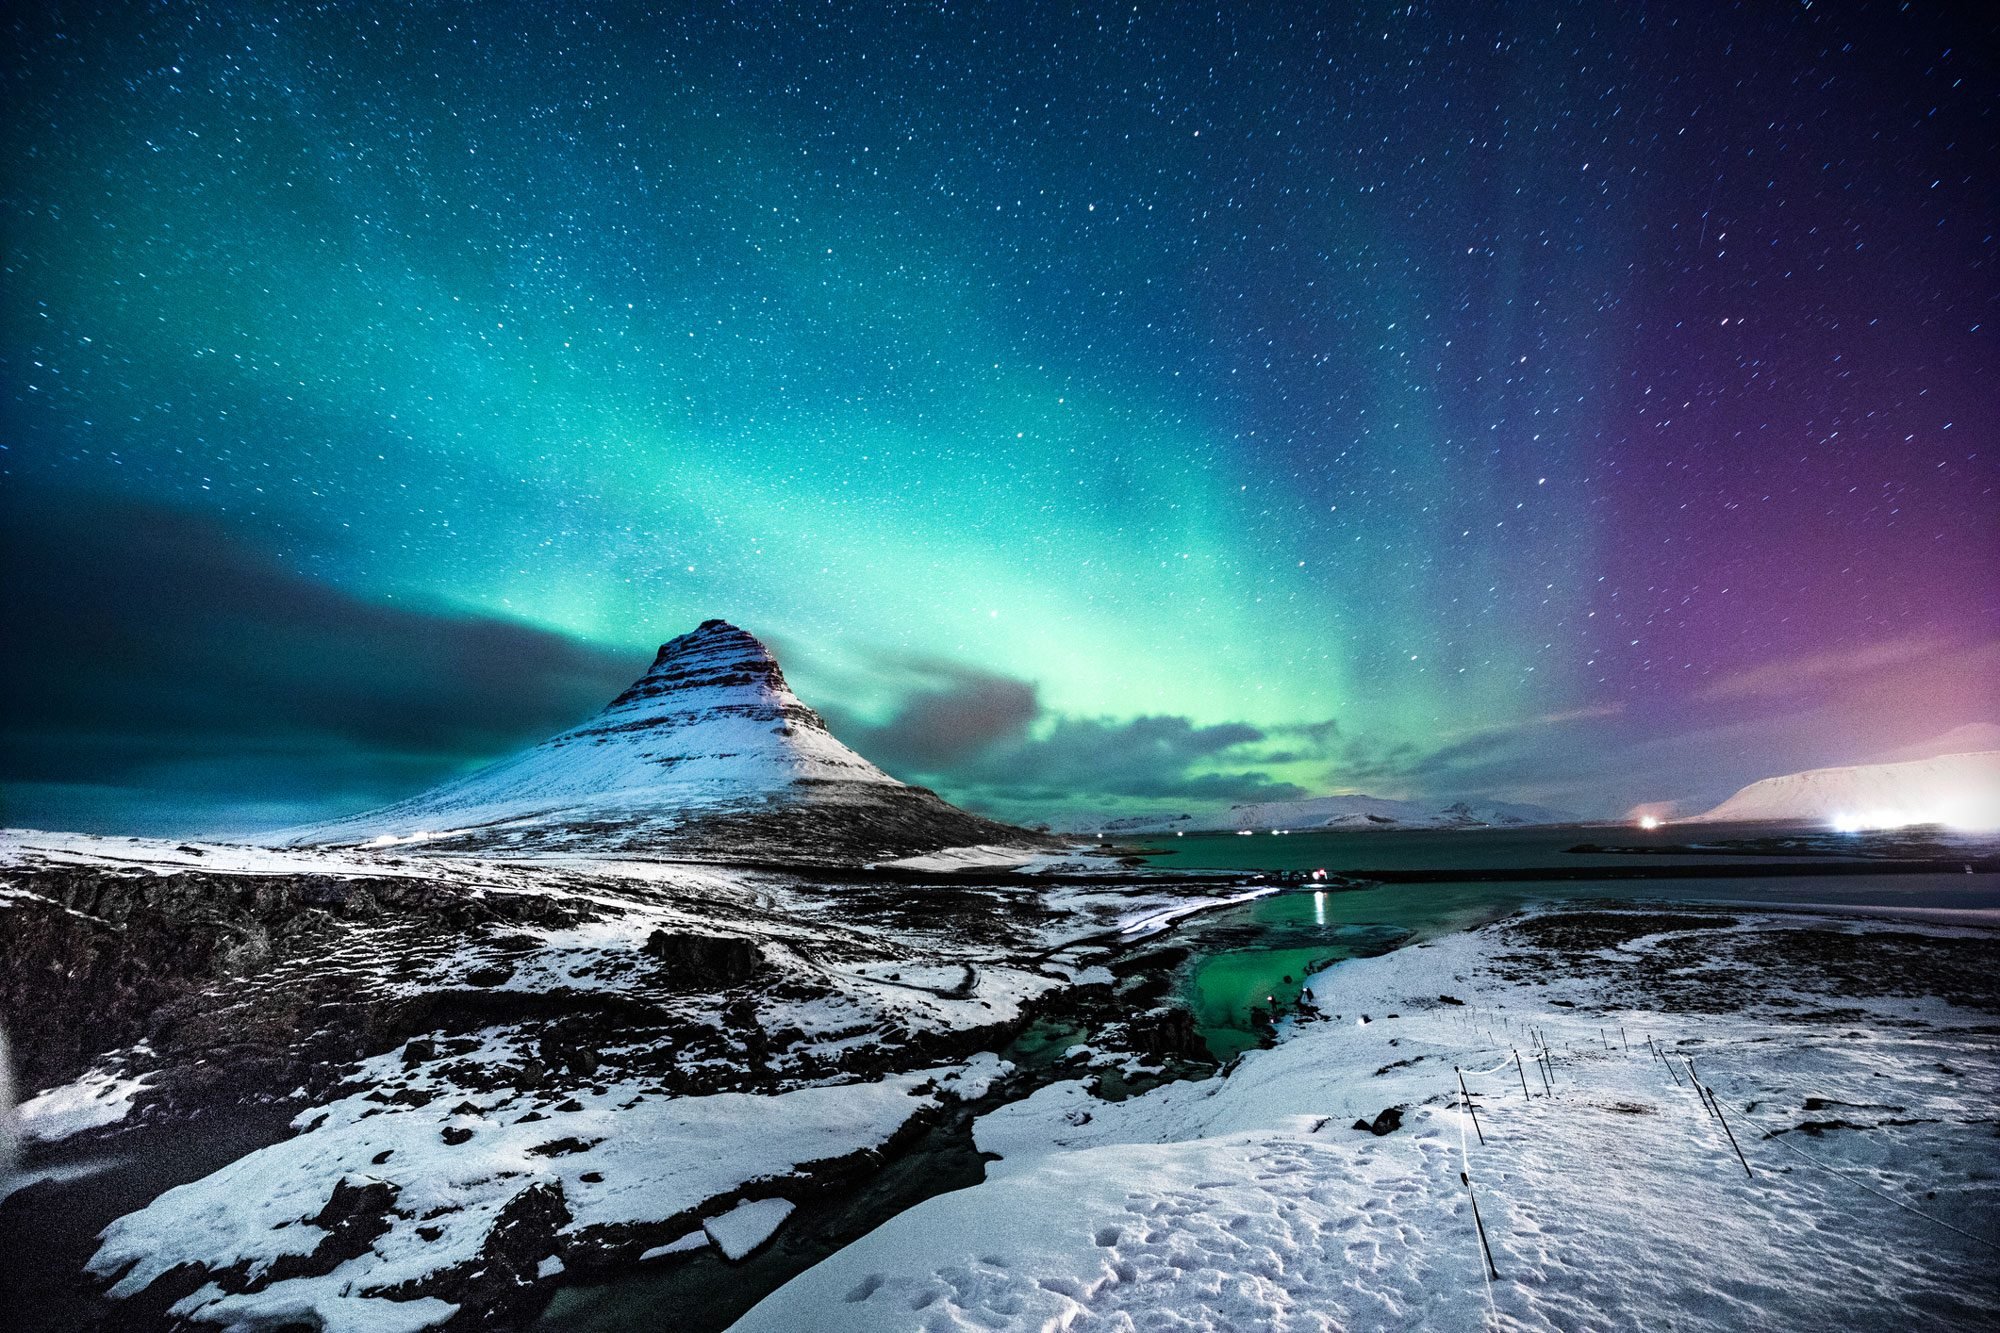 Where to See Northern Lights: 8 Best Spots for Aurora Borealis Viewing